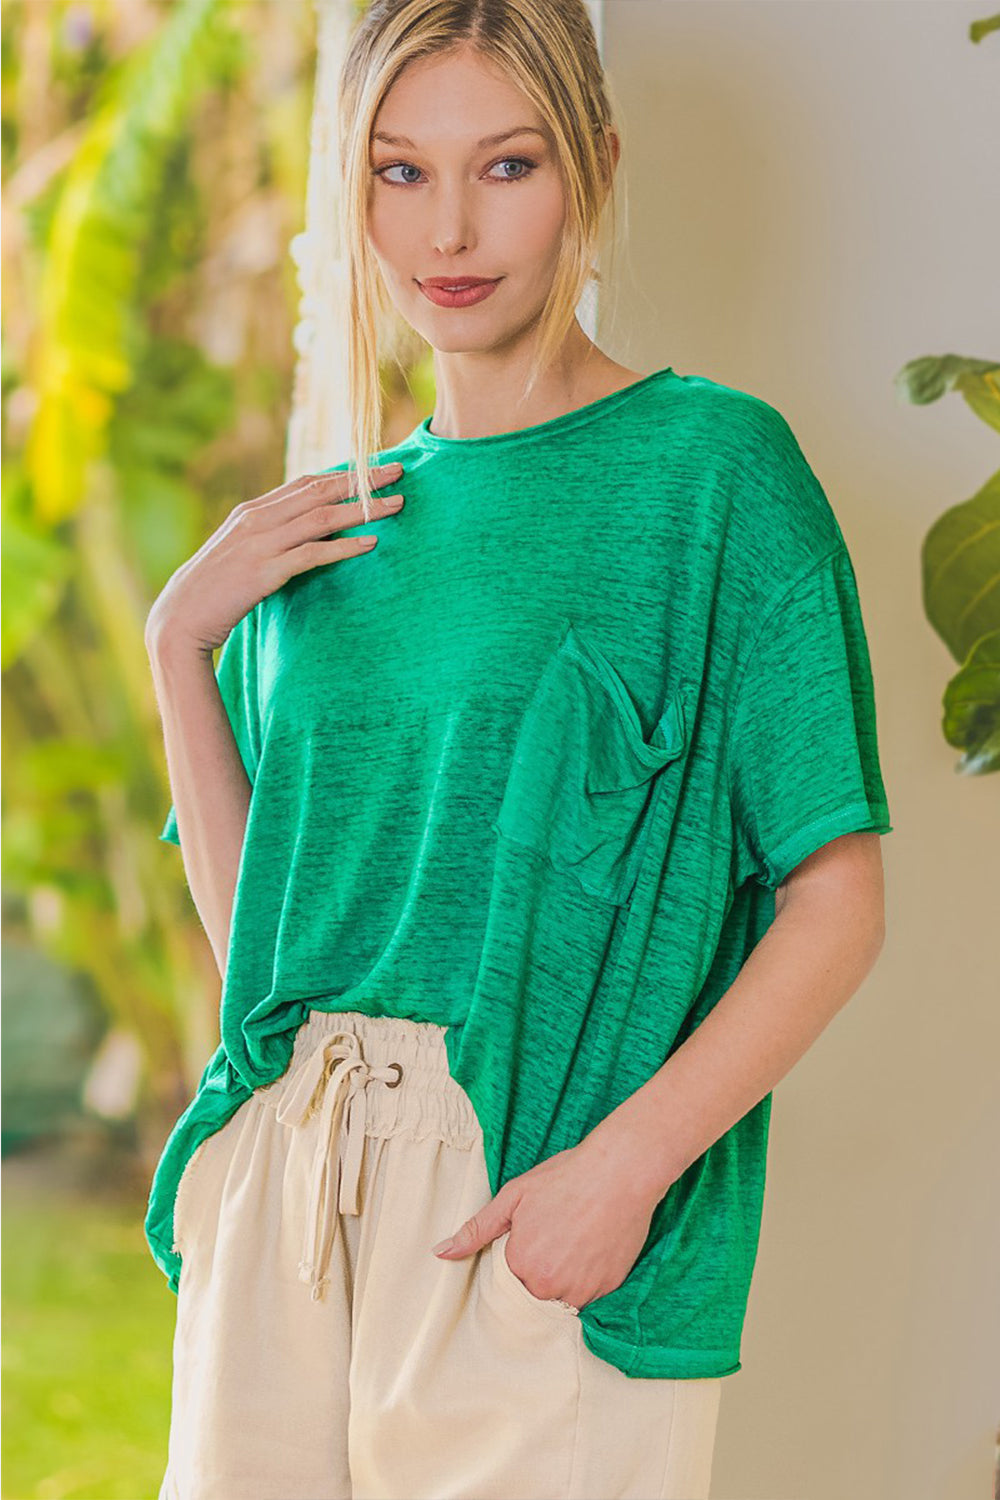 Zenana Pocketed Round Neck Dropped Shoulder T-Shirt | us.meeeshop